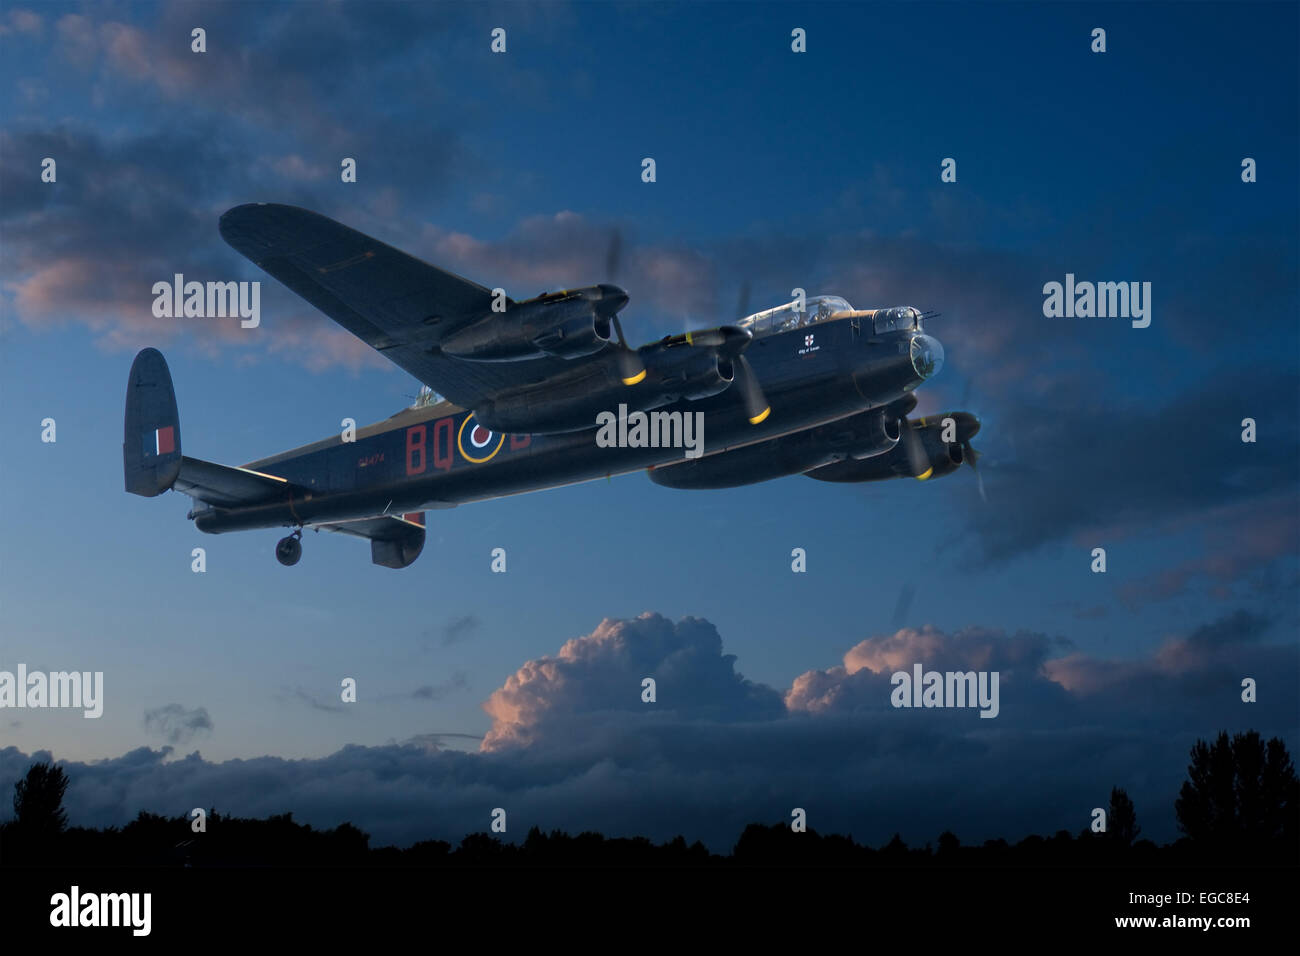 Avro Lancaster from the Battle of Britain memorial flight, superimposed on a dusk sky, as though taking off on a night raid. Stock Photo